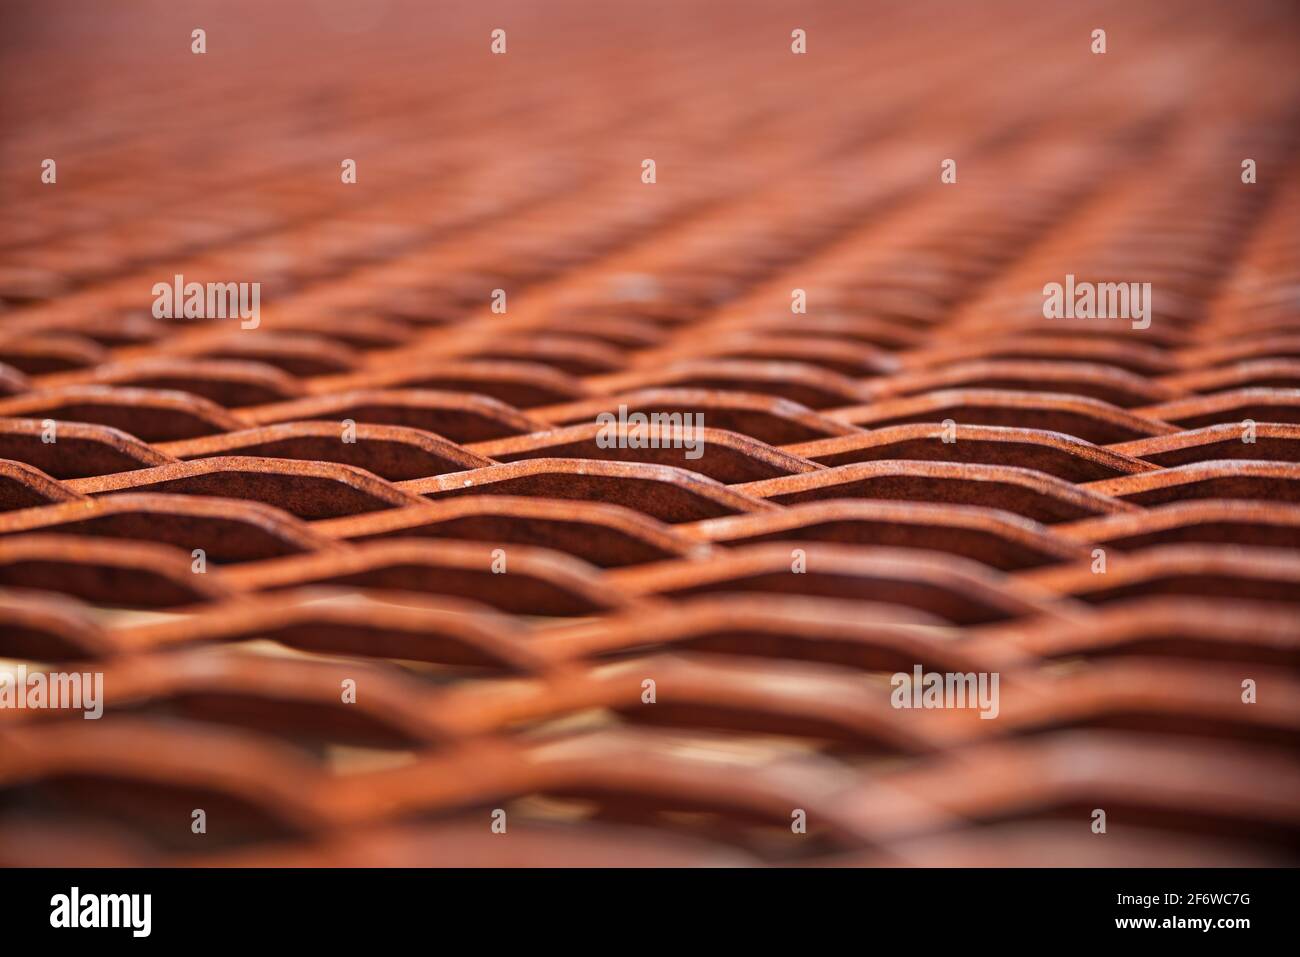 rusty metal mesh background with shallow depth of field Stock Photo